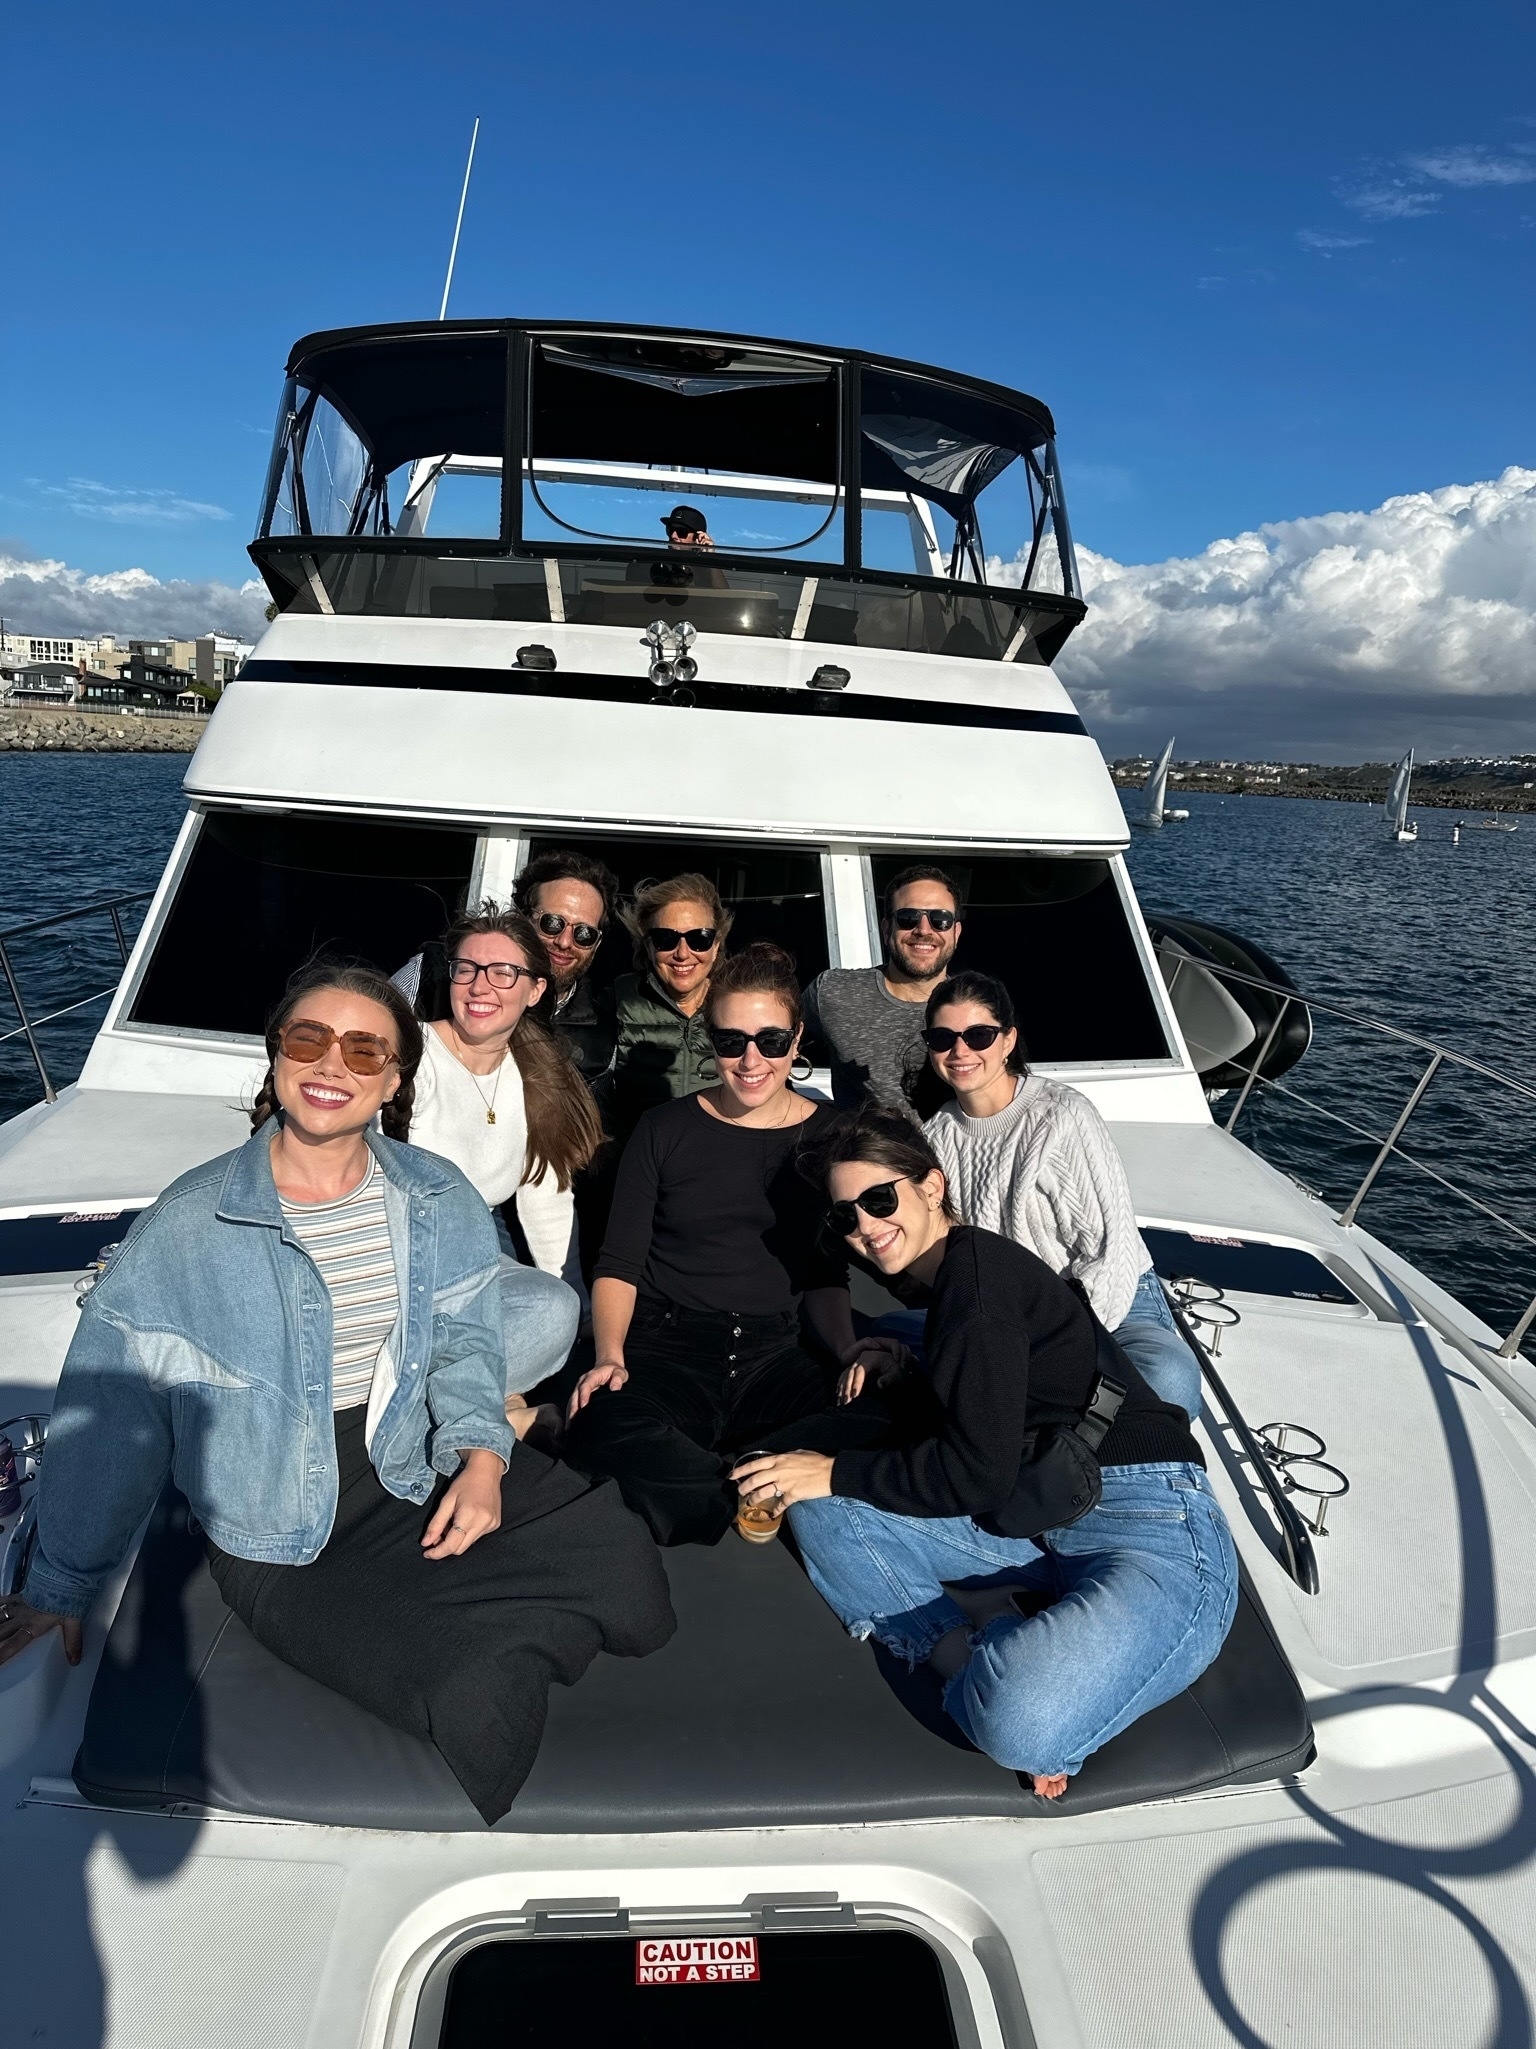 The author and her friends and family on the boat